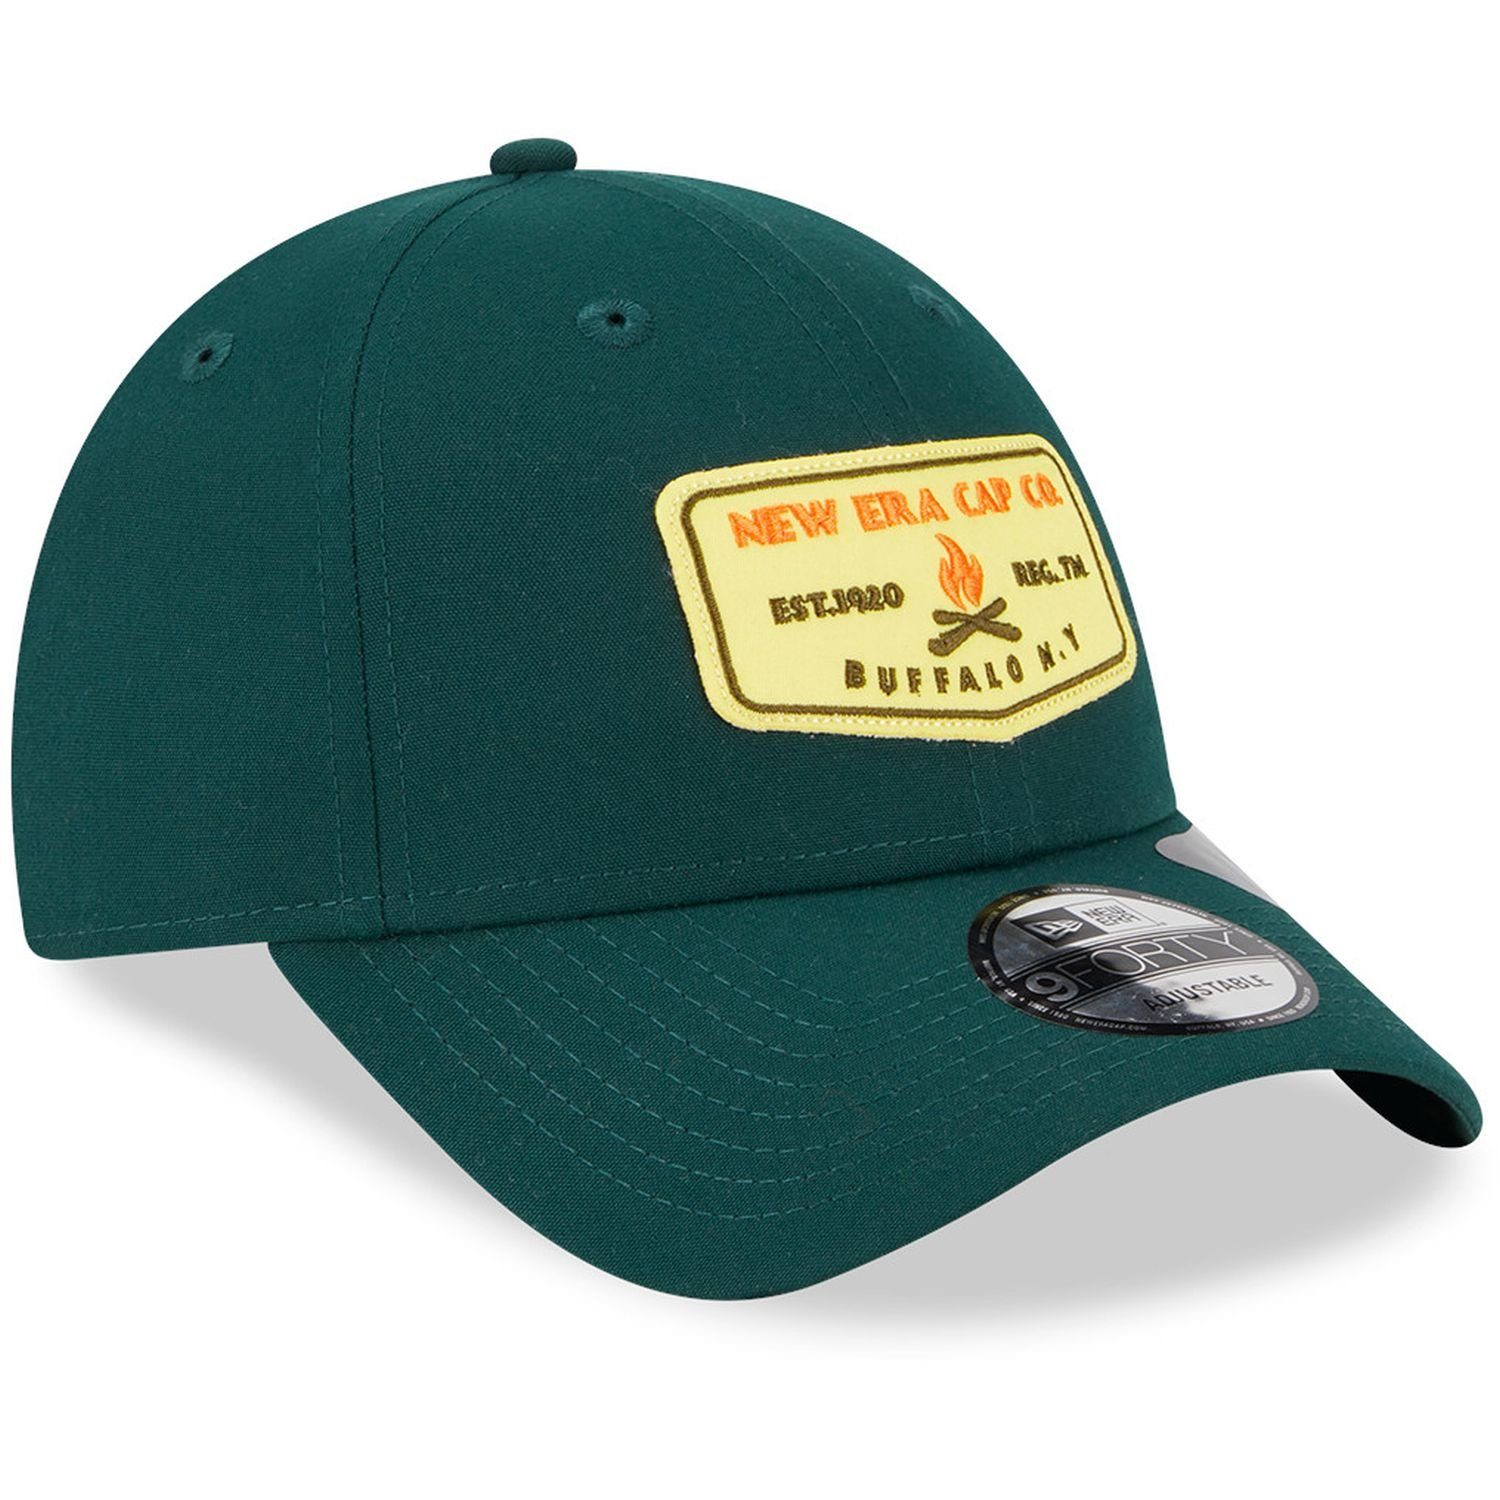 Era HERITAGE Trucker BRAND Strapback New Cap 9Forty forest PATCH